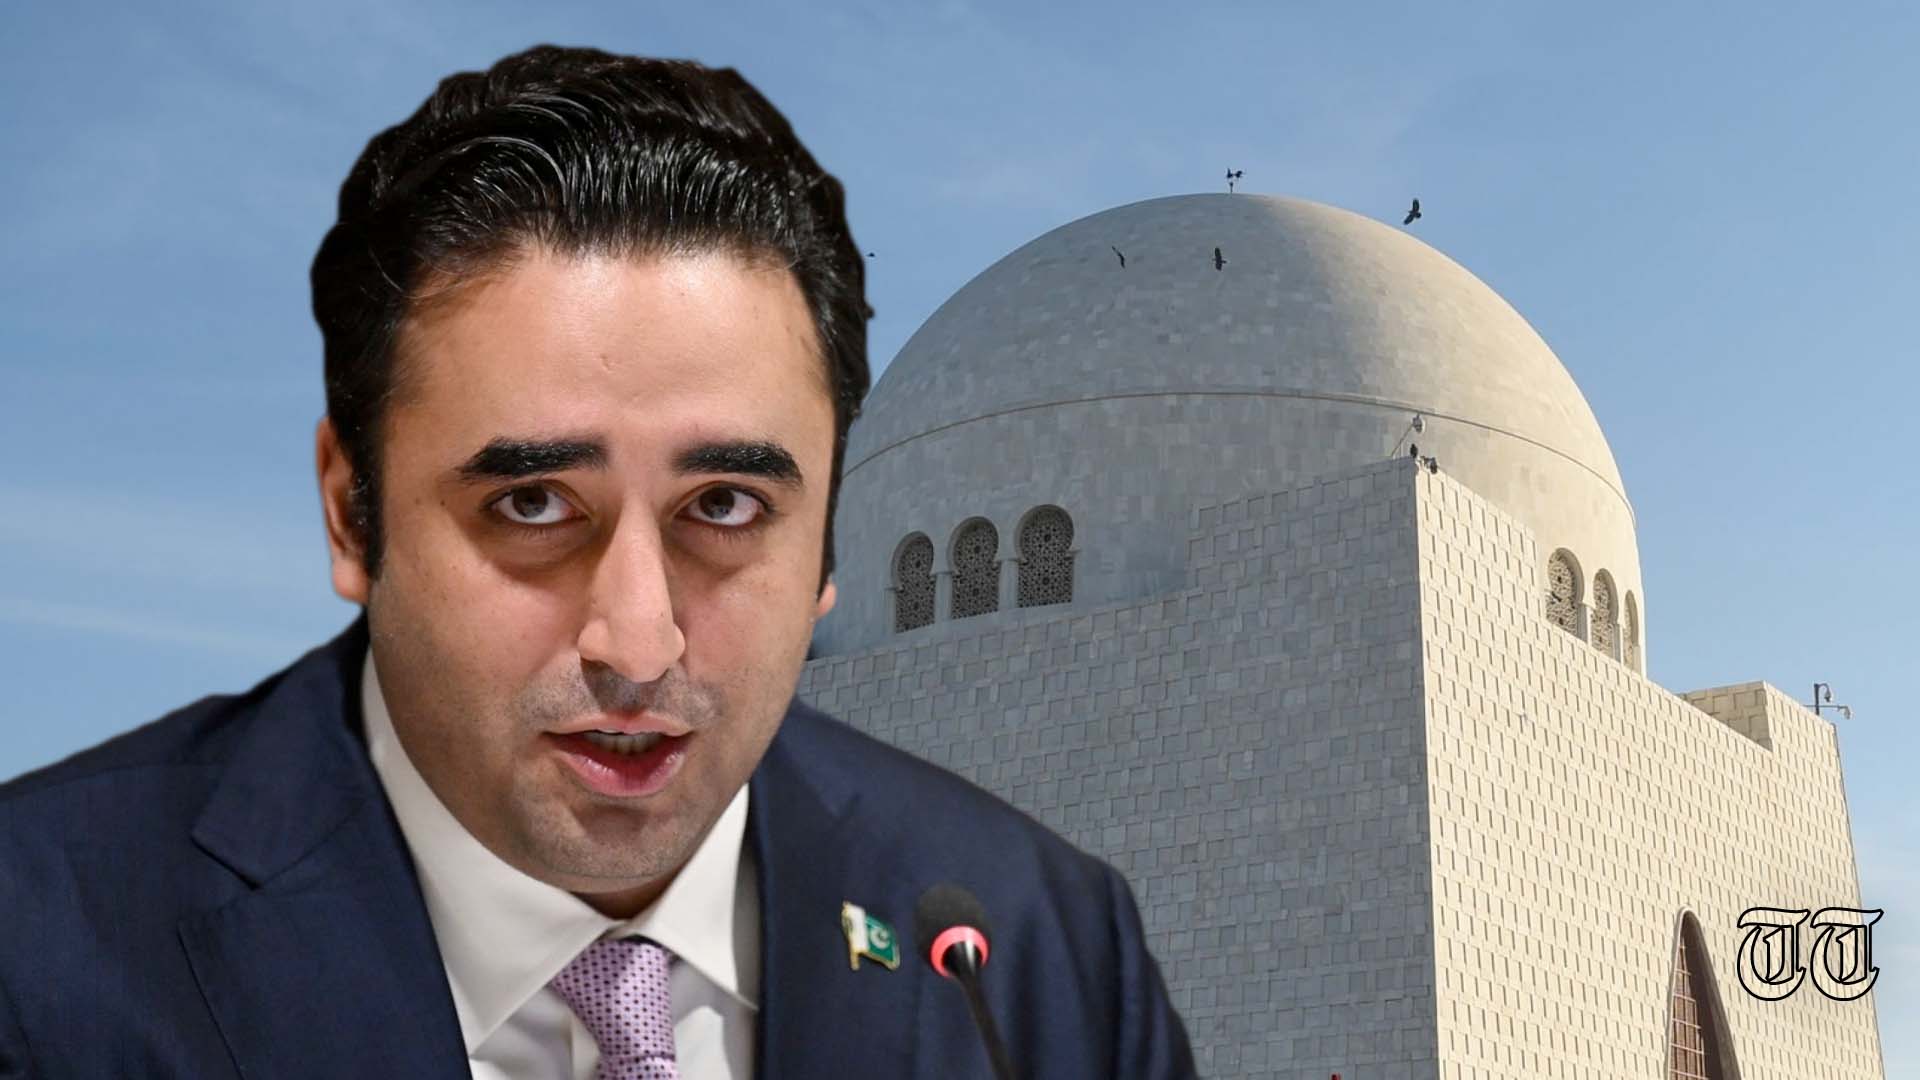 A combination file photo is shown of foreign minister Bilawal Bhutto-Zardari alongside the Jinnah Mausoleum in Karachi. — FILE/THE THURSDAY TIMES